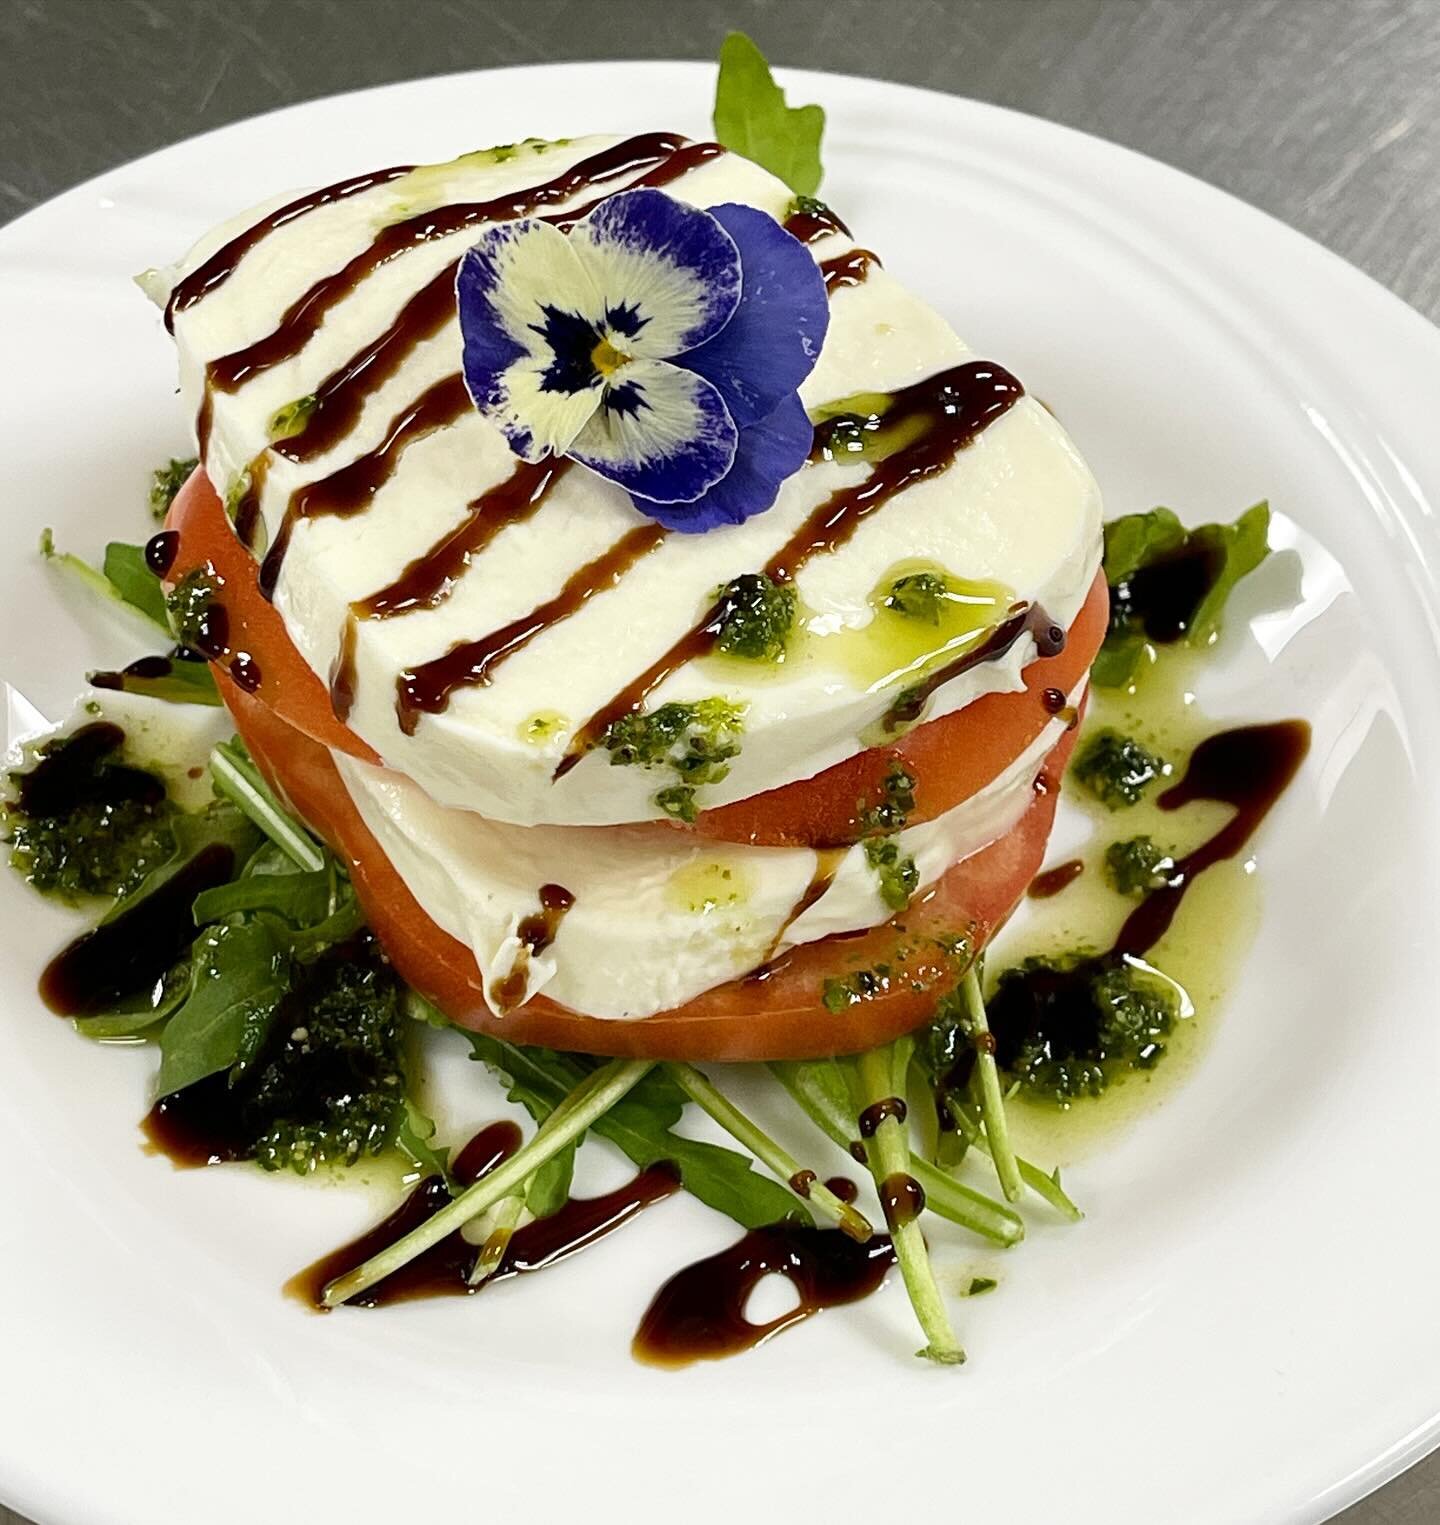 The perfect spring/summer Caprese salad. Vine ripe tomatoes and hand pulled fresh mozzarella over a bed of baby arugula, drizzled with pesto and balsamic reduction. 

Call or email today!
 
(203)-269-9266

Info@bourassacatering.com
.
.
#cheflife  #fo